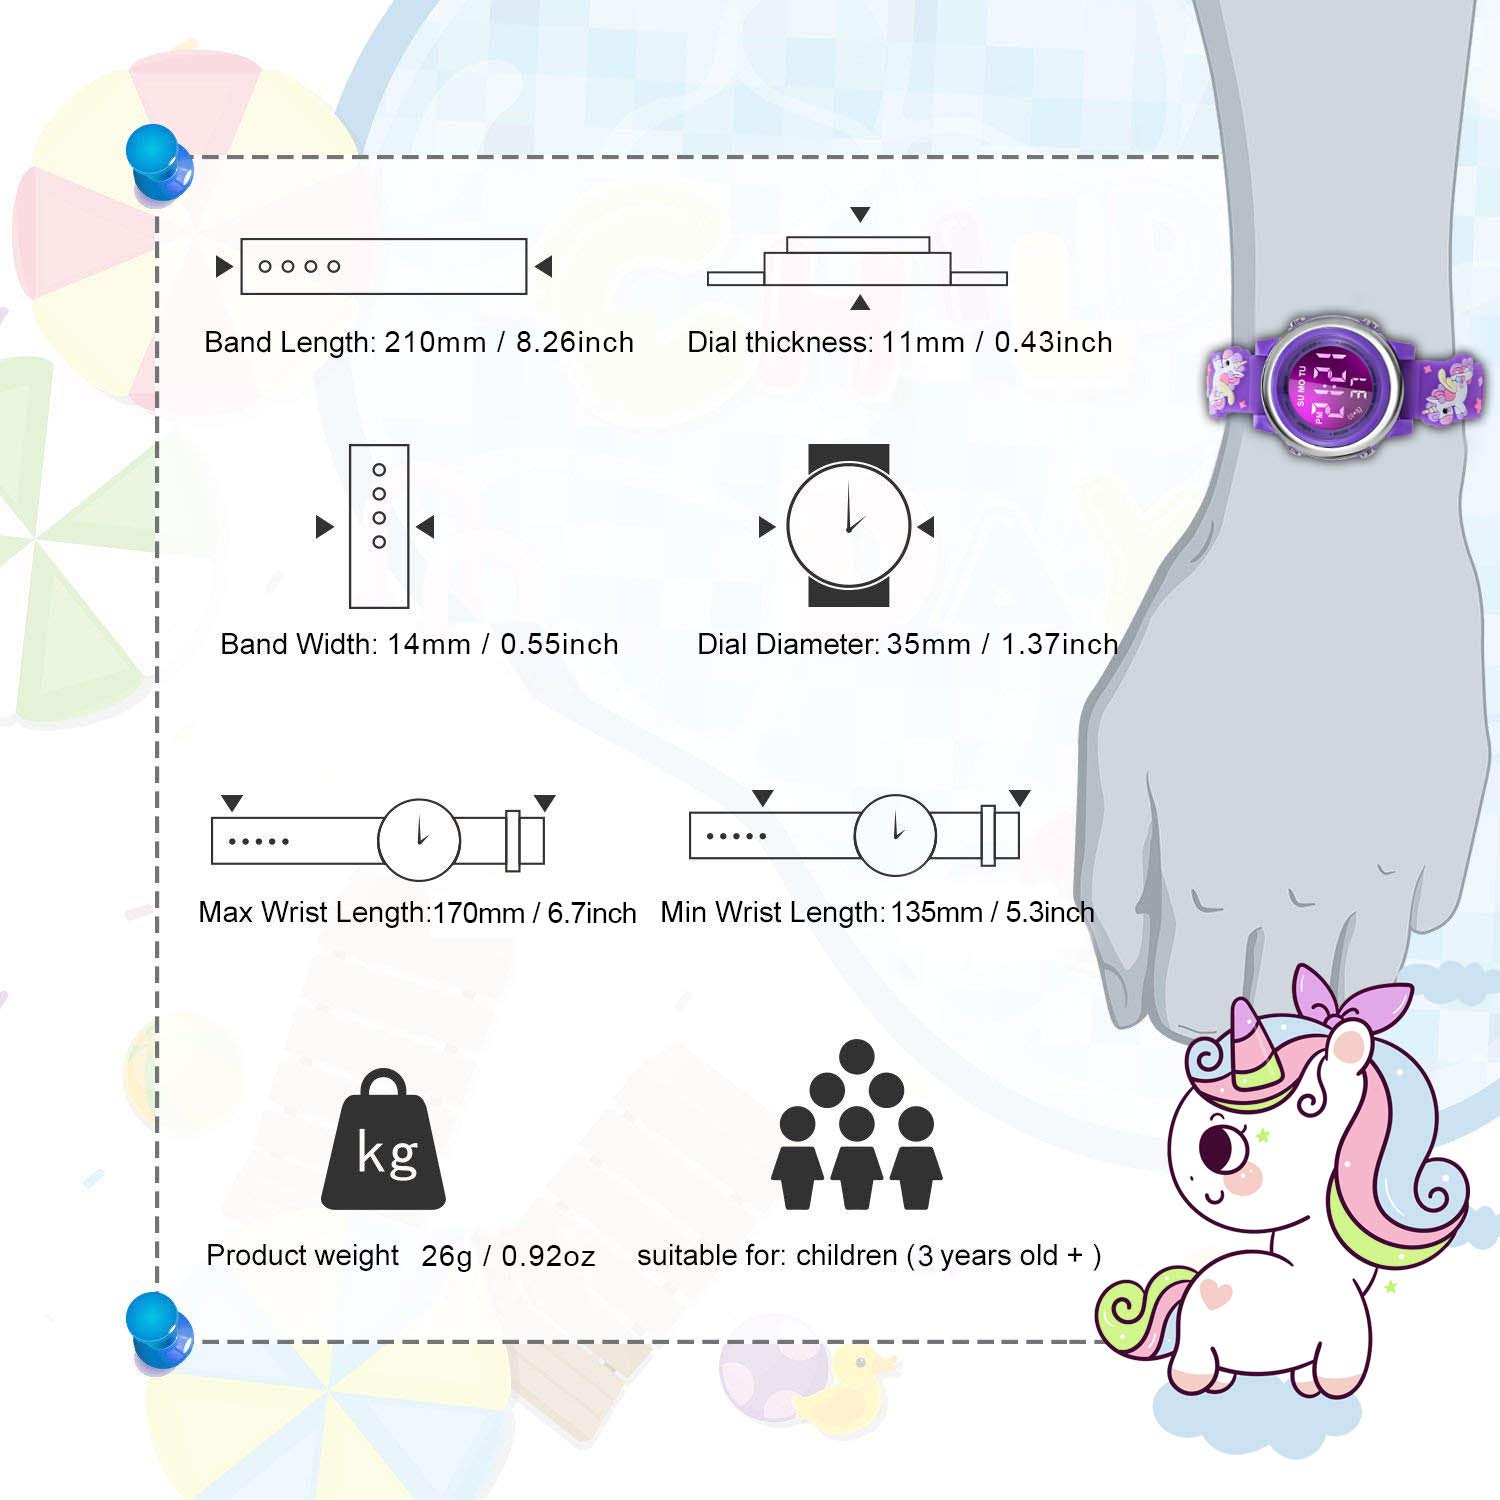 cofuo Girls Digital Watch Age 3-12 for Gifts, 3D Cartoon Waterproof Sports Outdoor LED Electrical Watches with Luminous Alarm Stopwatch Toddler Wristwatch